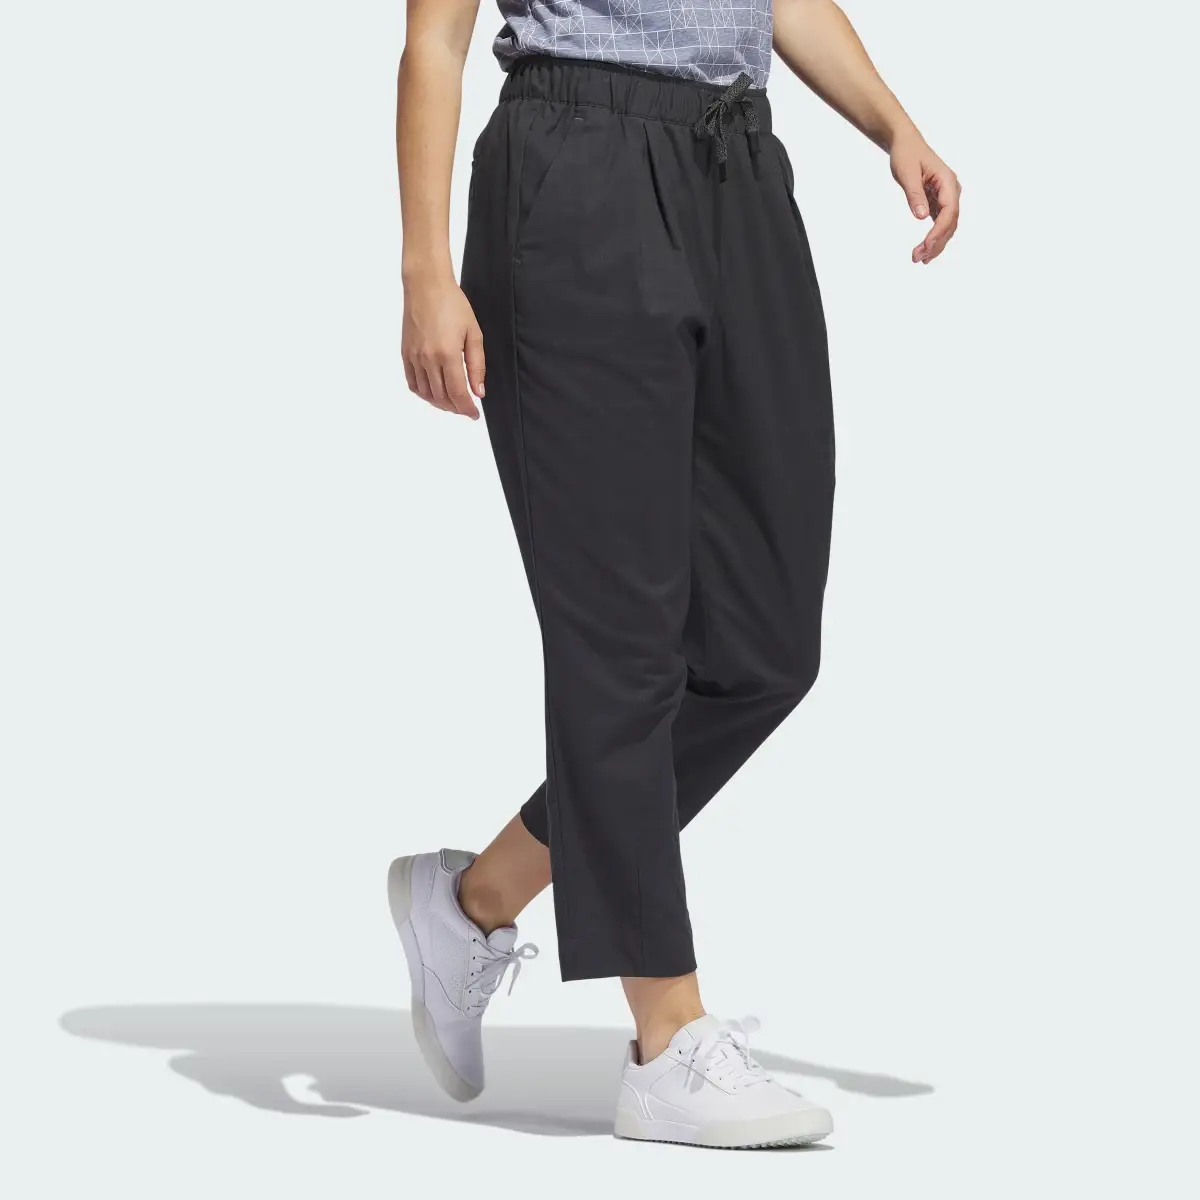 Adidas Go-To Joggers. 3